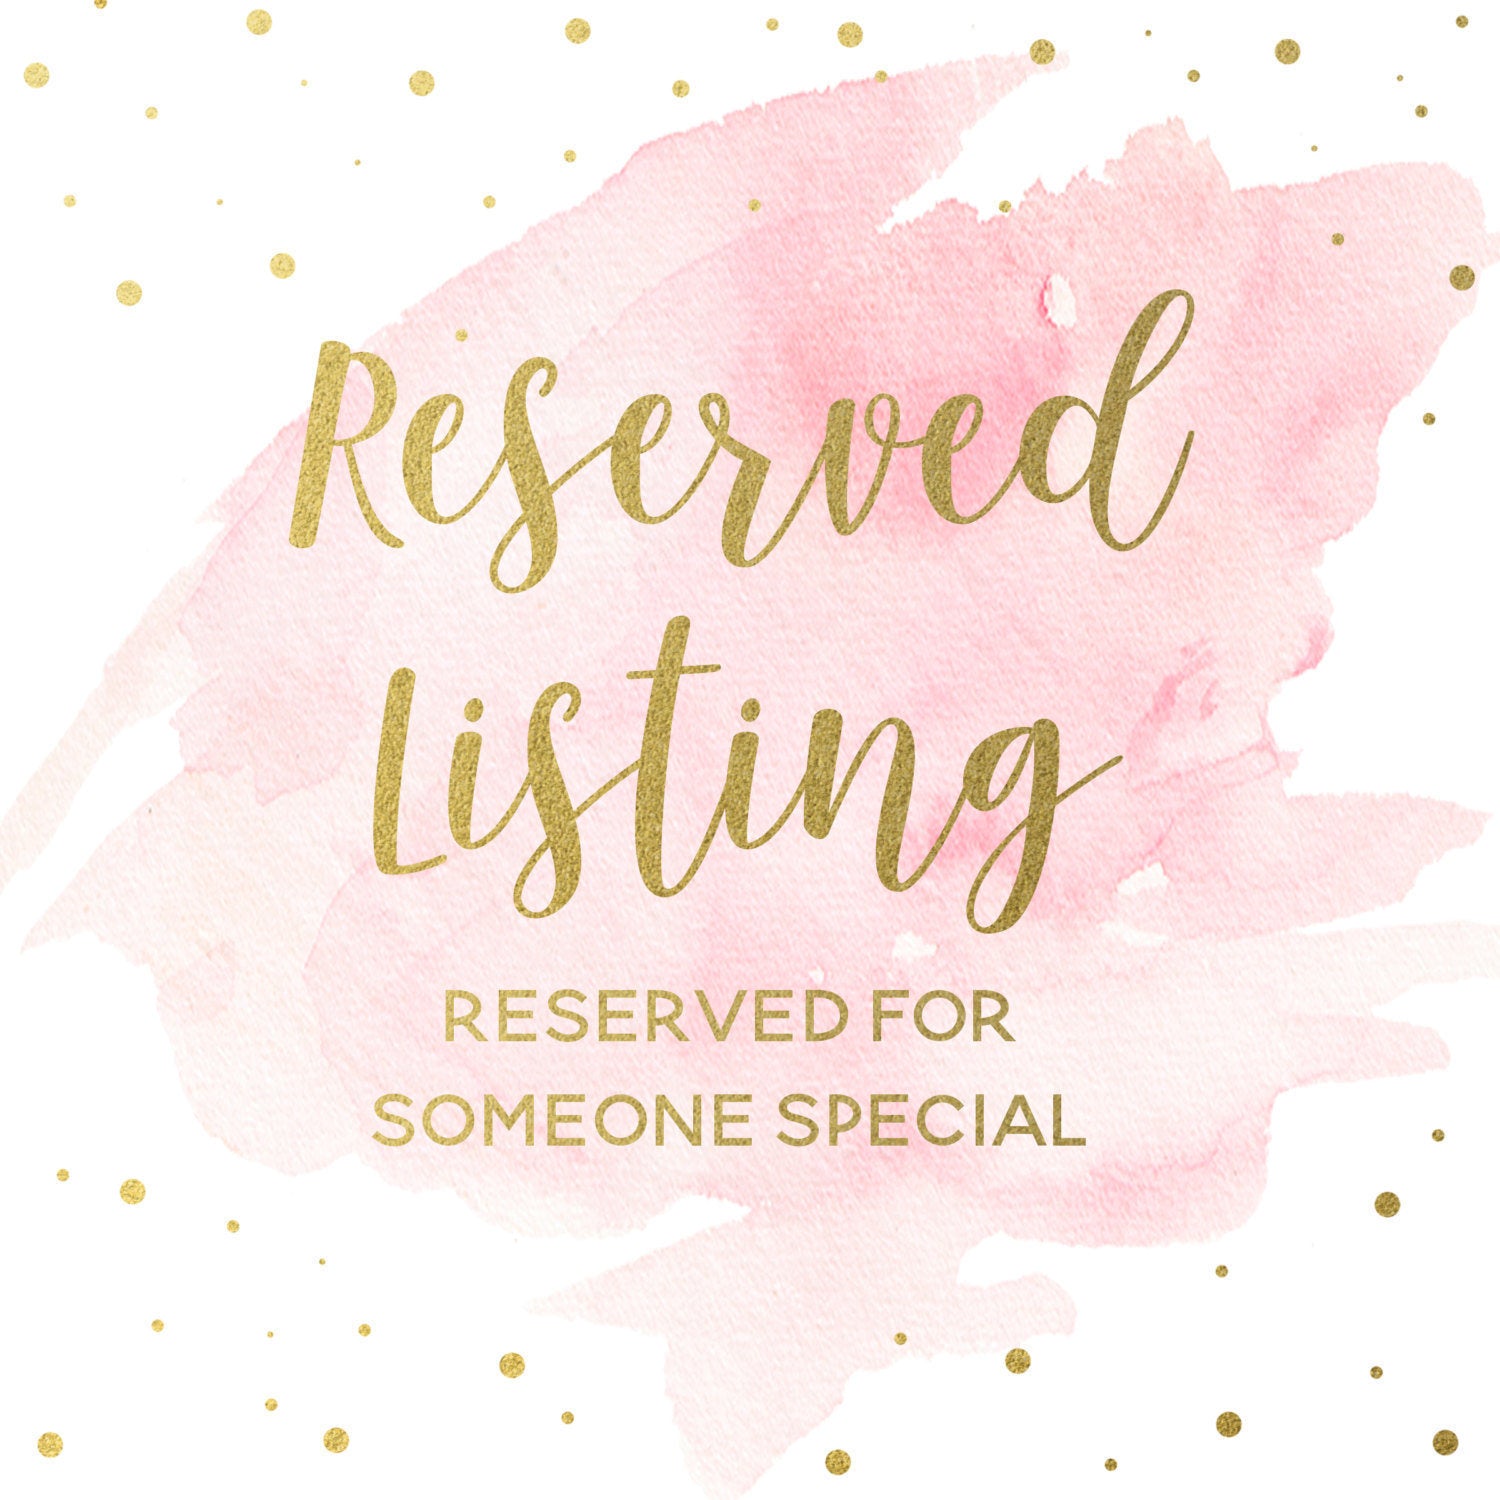 Reserved Listing - Amy O-K